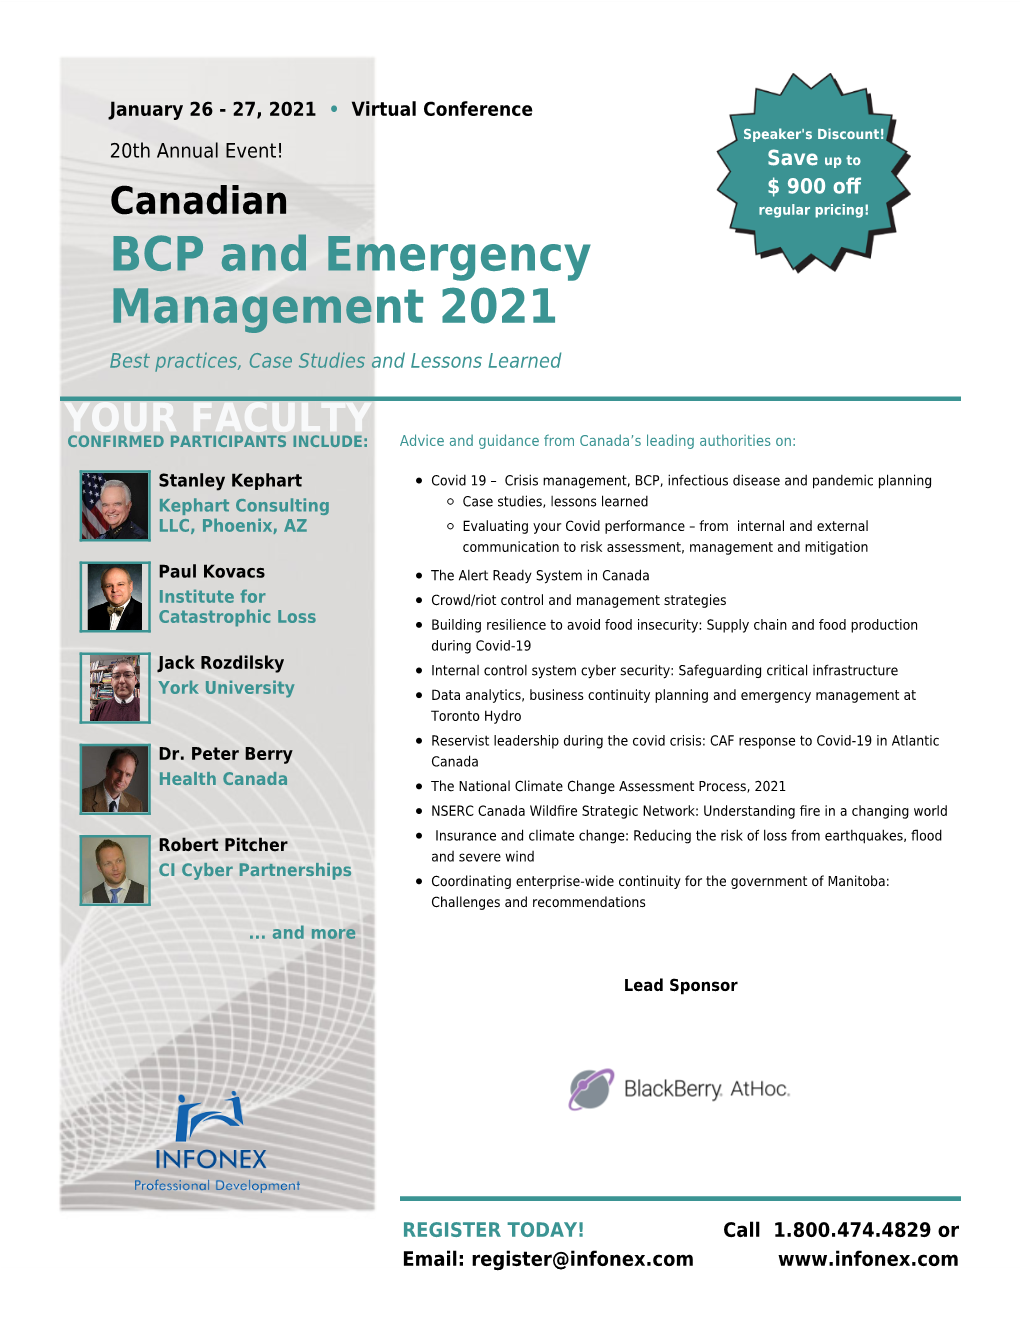 Canadian BCP and Emergency Management 2021 January 26 - 27, 2021 • Virtual Conference